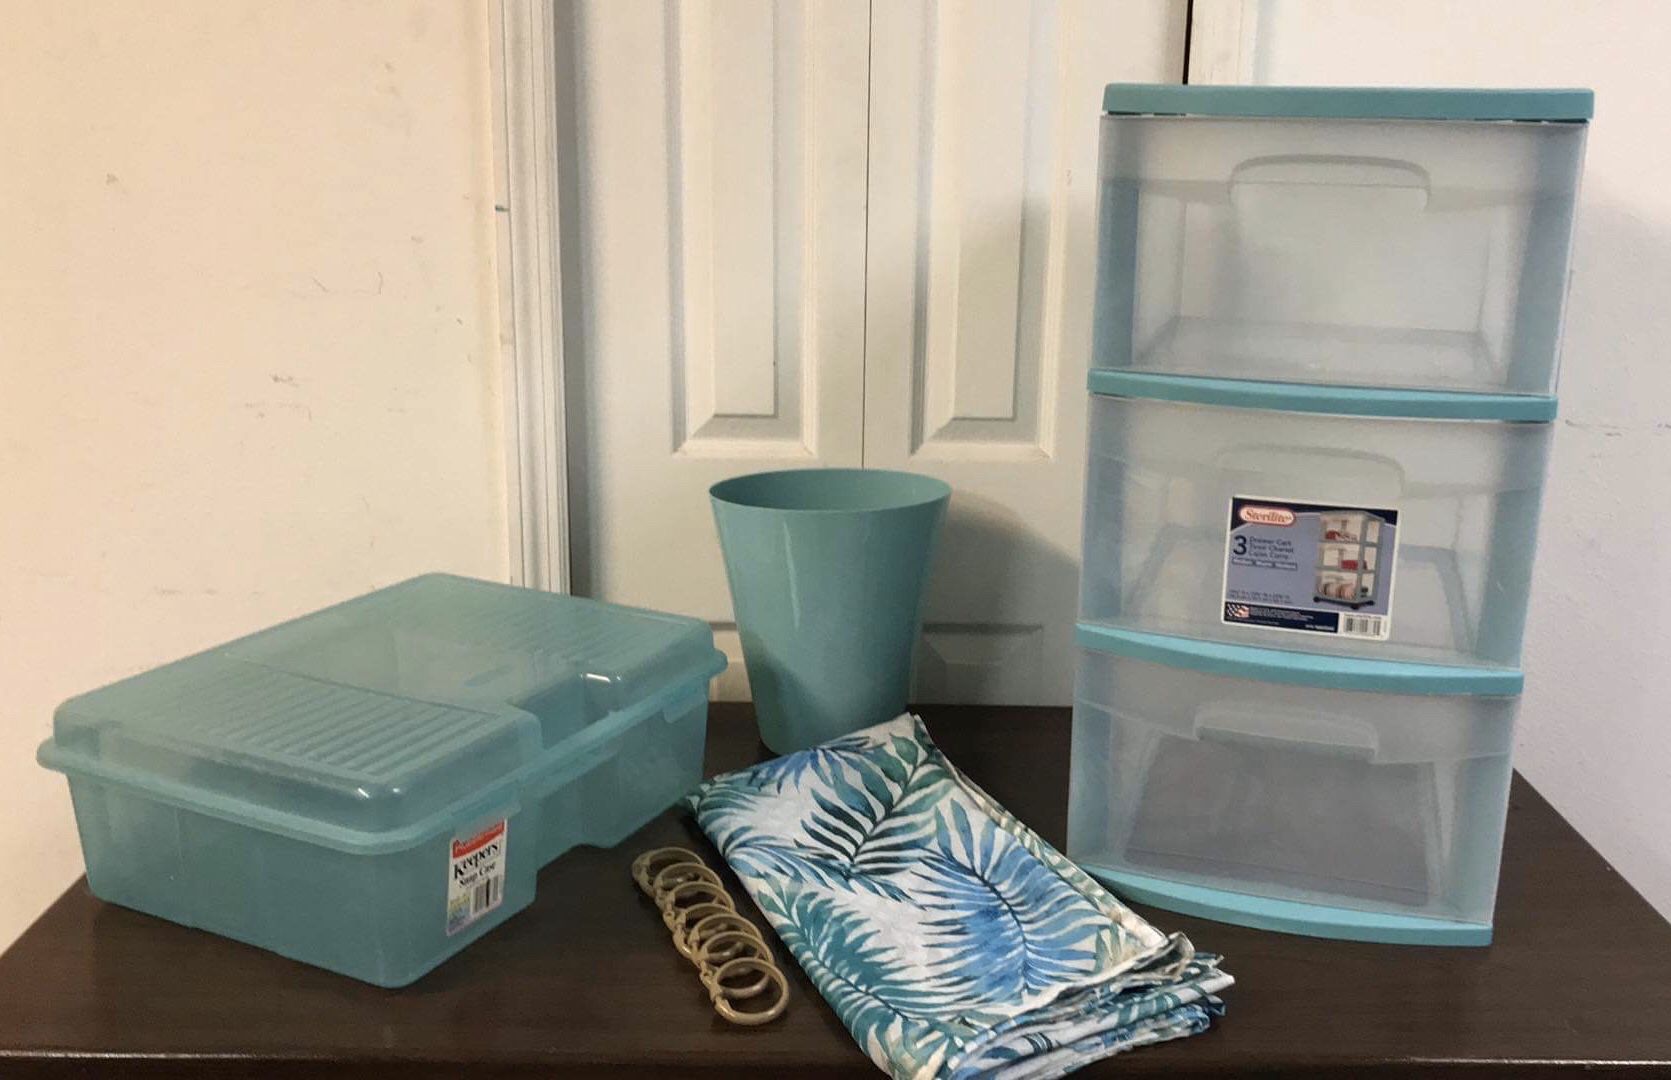 All the set, plastic storage buckets , bathroom curtains with hooks and a small basket